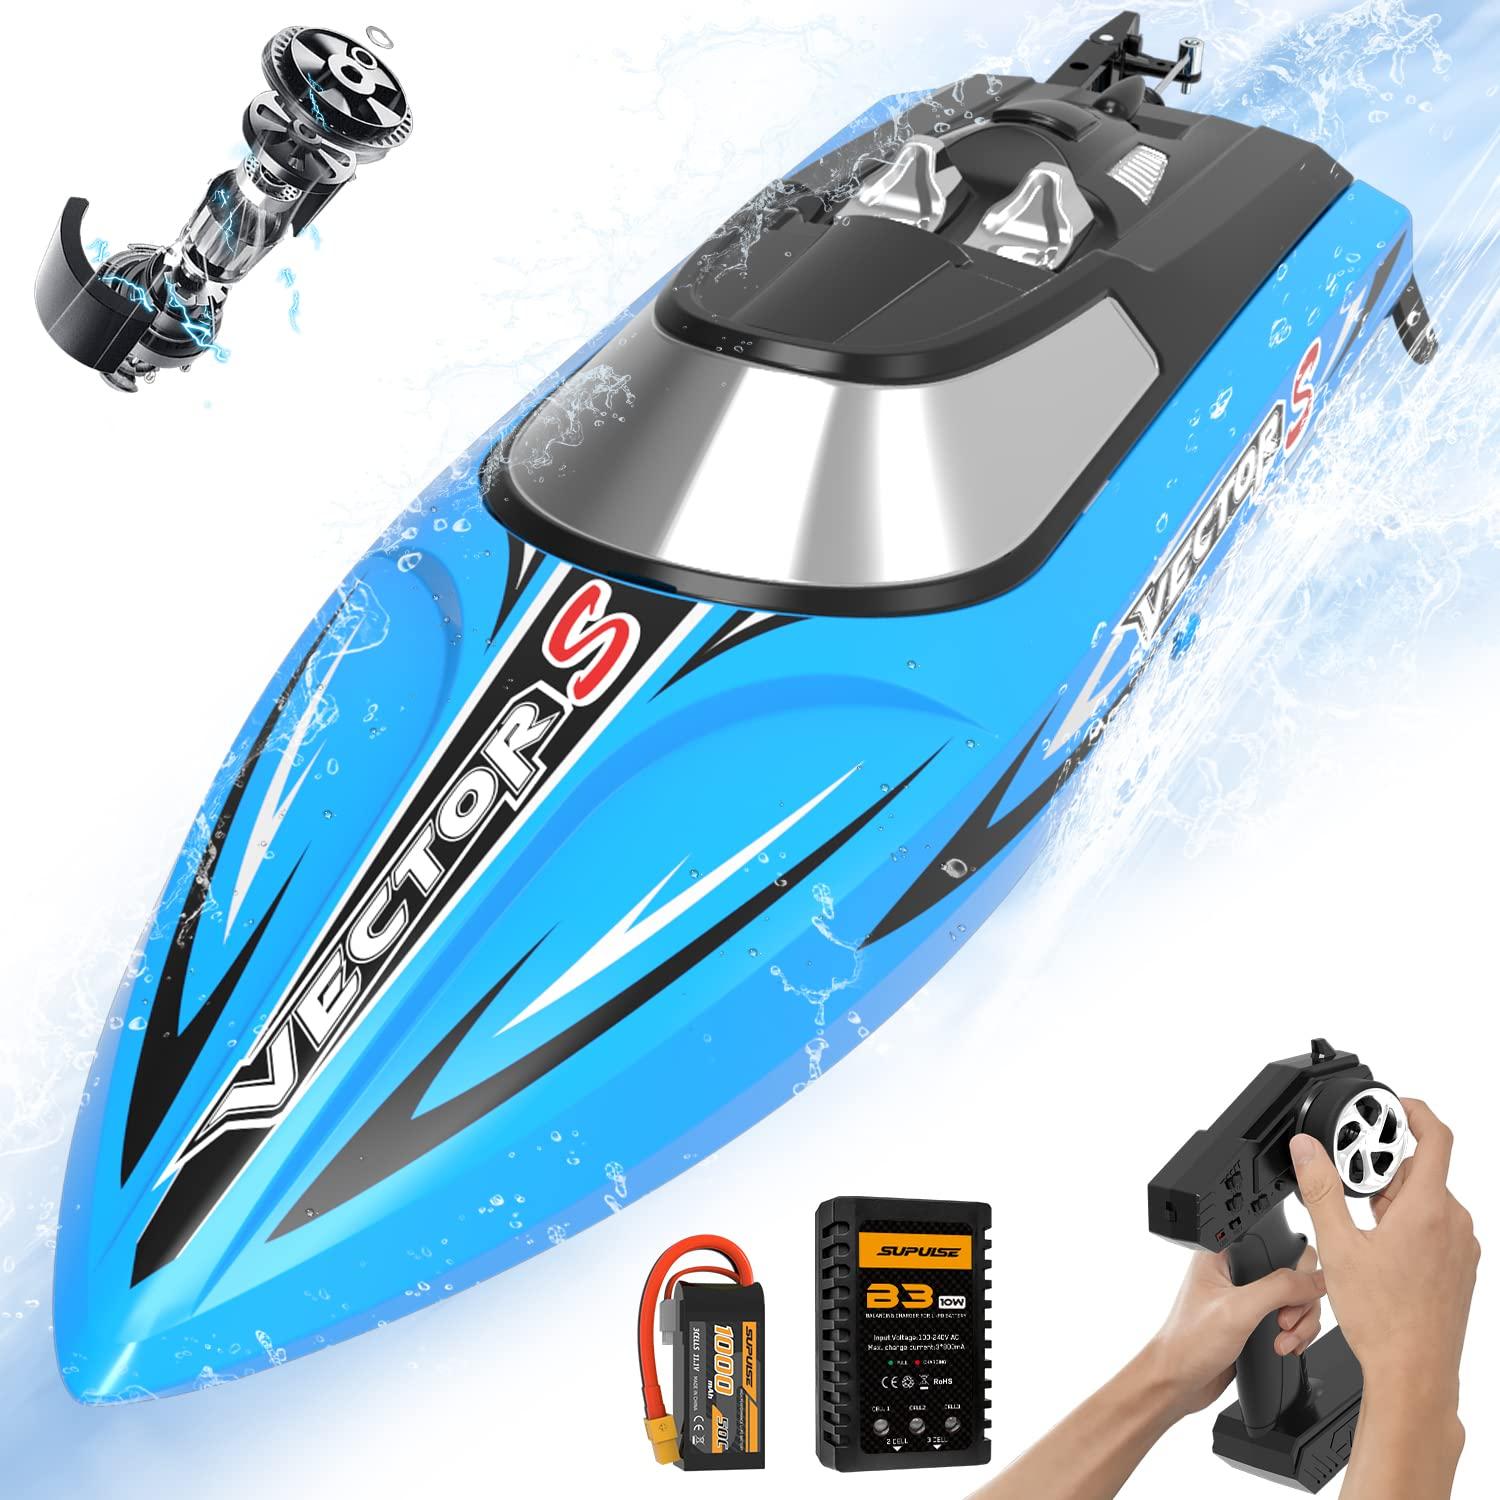 Vector 30 Rc Boat: Exceptional Performance in a Small Package: Vector 30 RC Boat